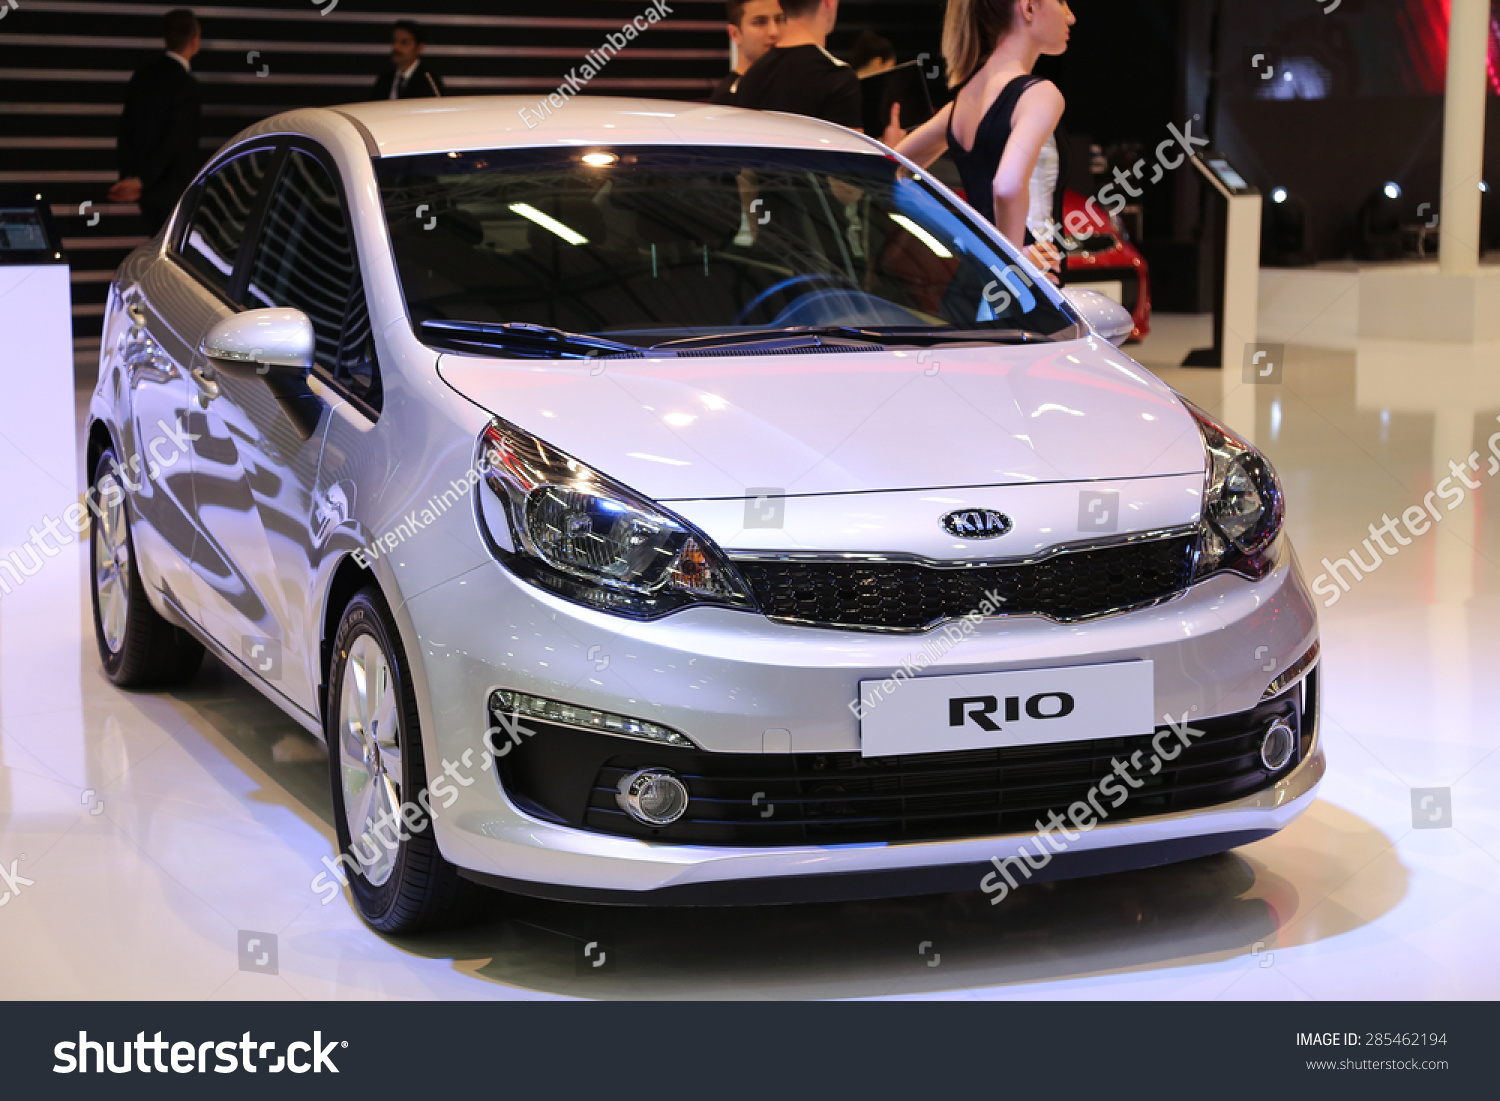 The Enhanced Kia Rio 5 Door In Turkey Check Out The Images Flickr